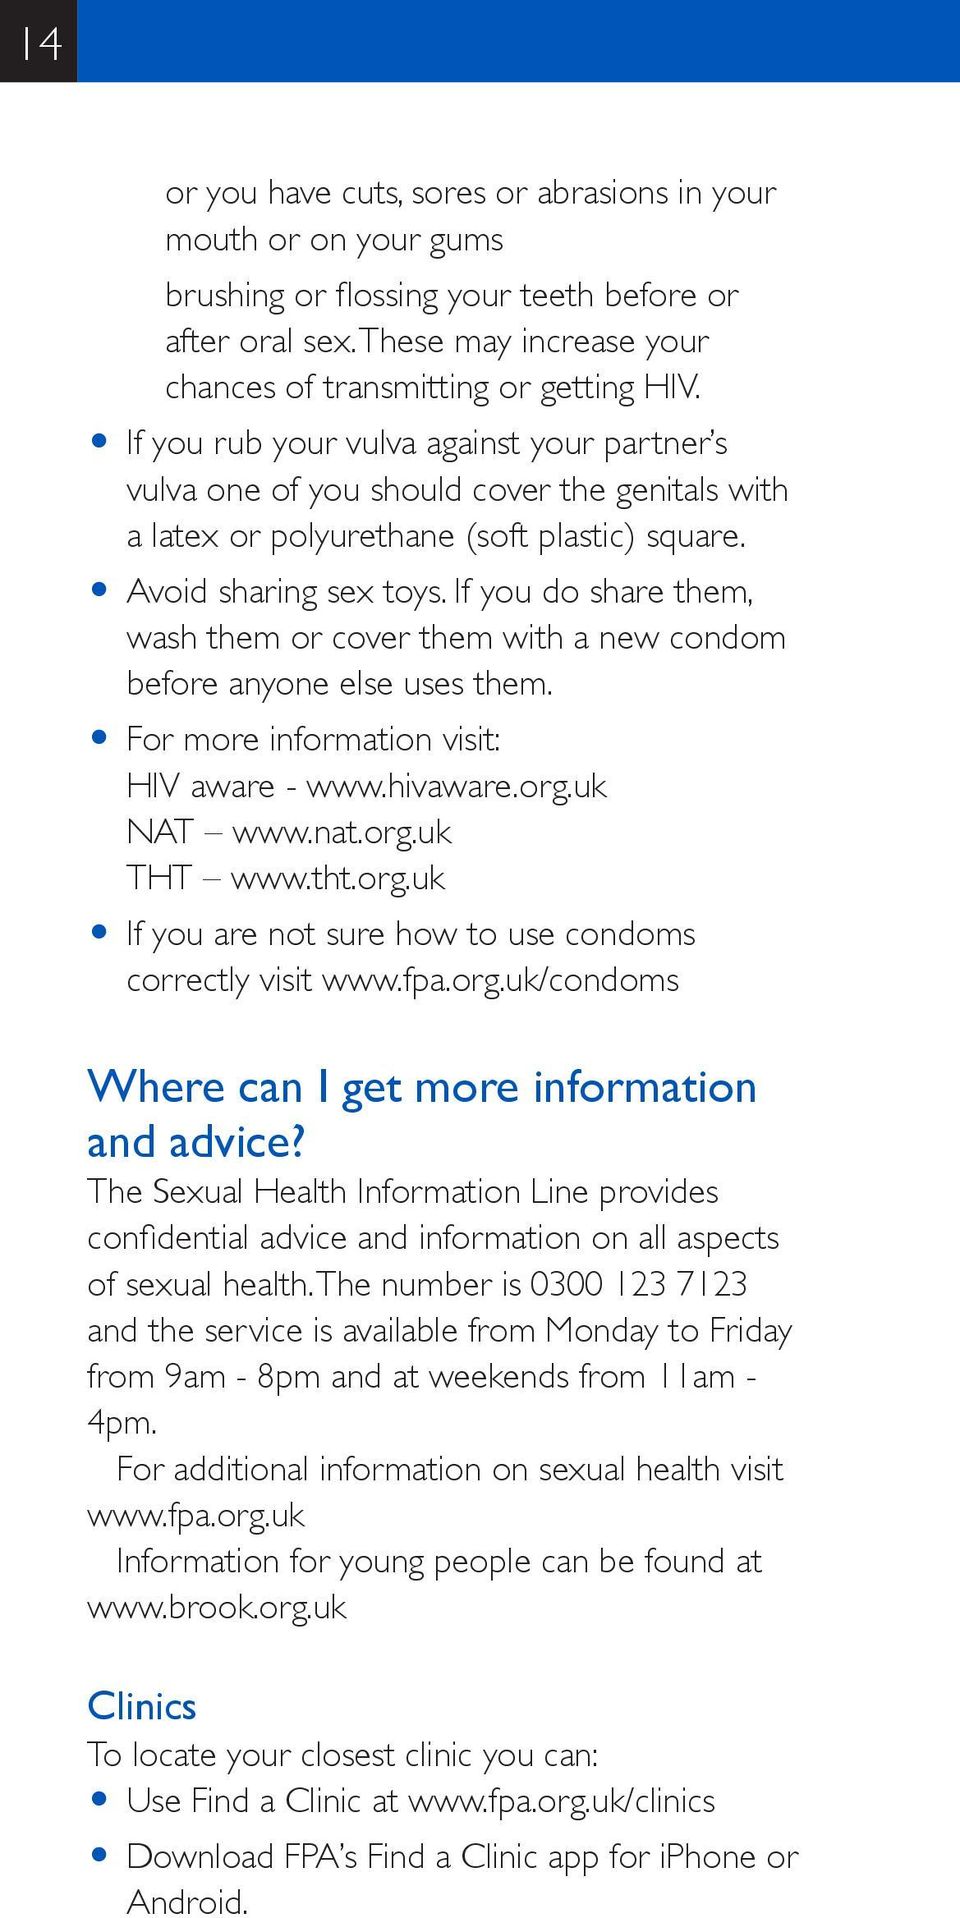 If you do share them, wash them or cover them with a new condom before anyone else uses them. O For more information visit: HIV aware - www.hivaware.org.